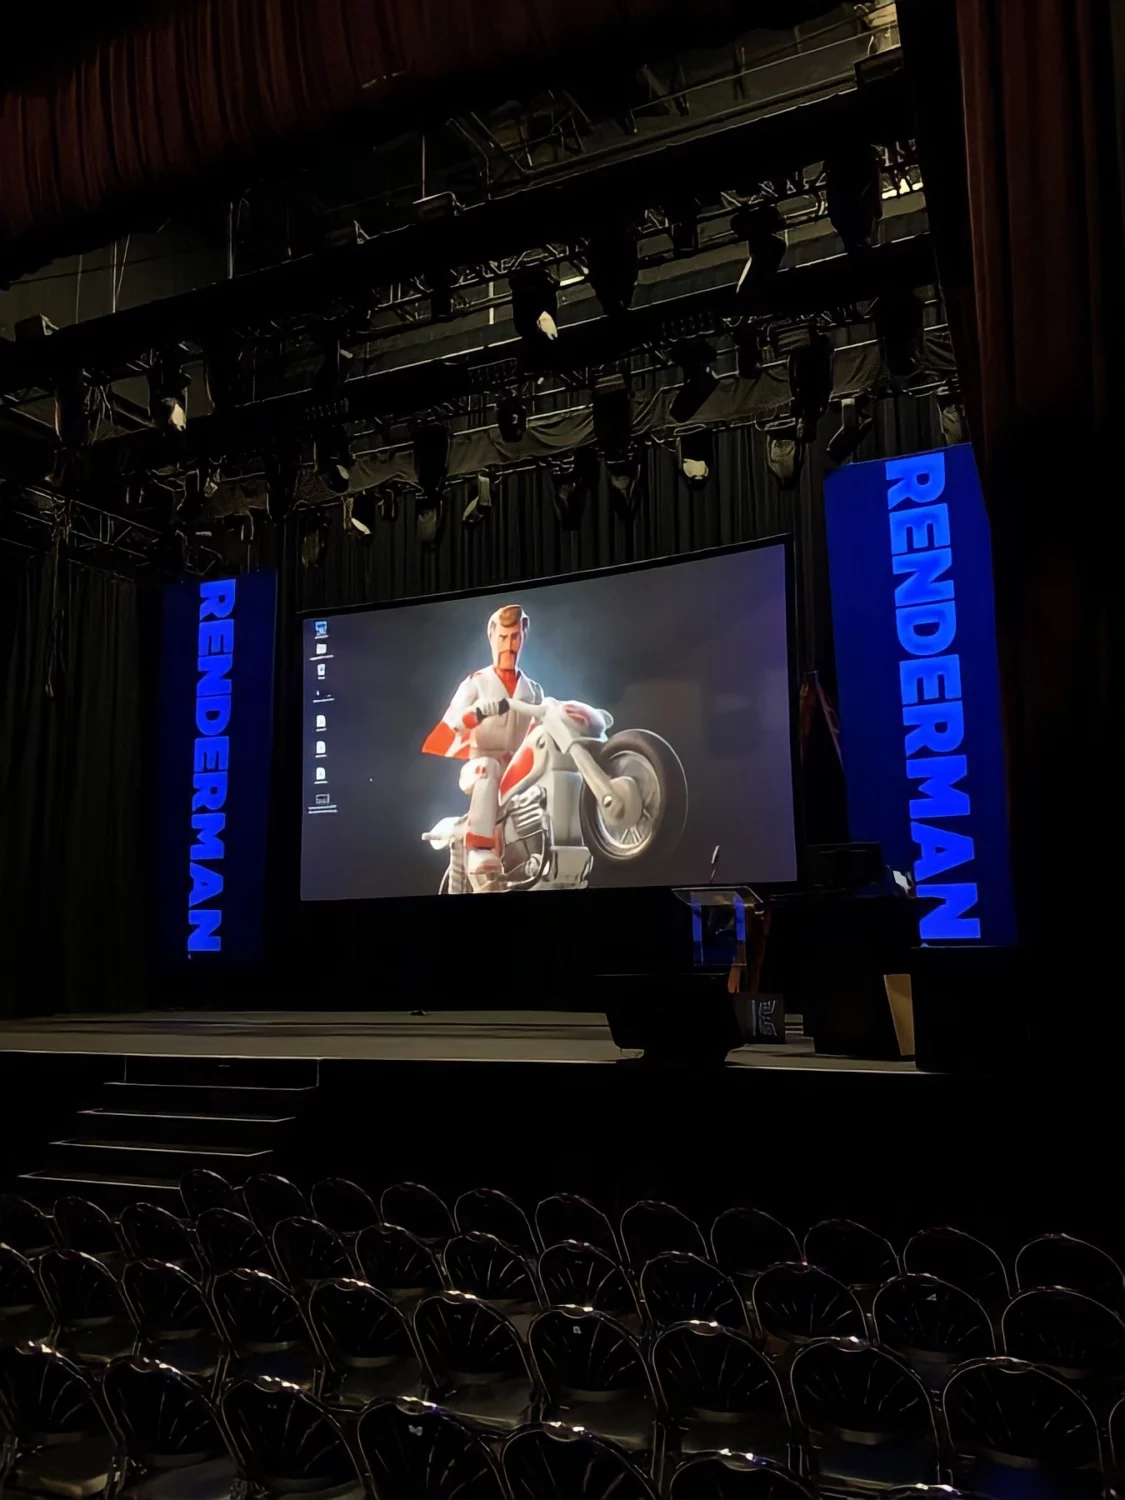 Large LED screen in theatre